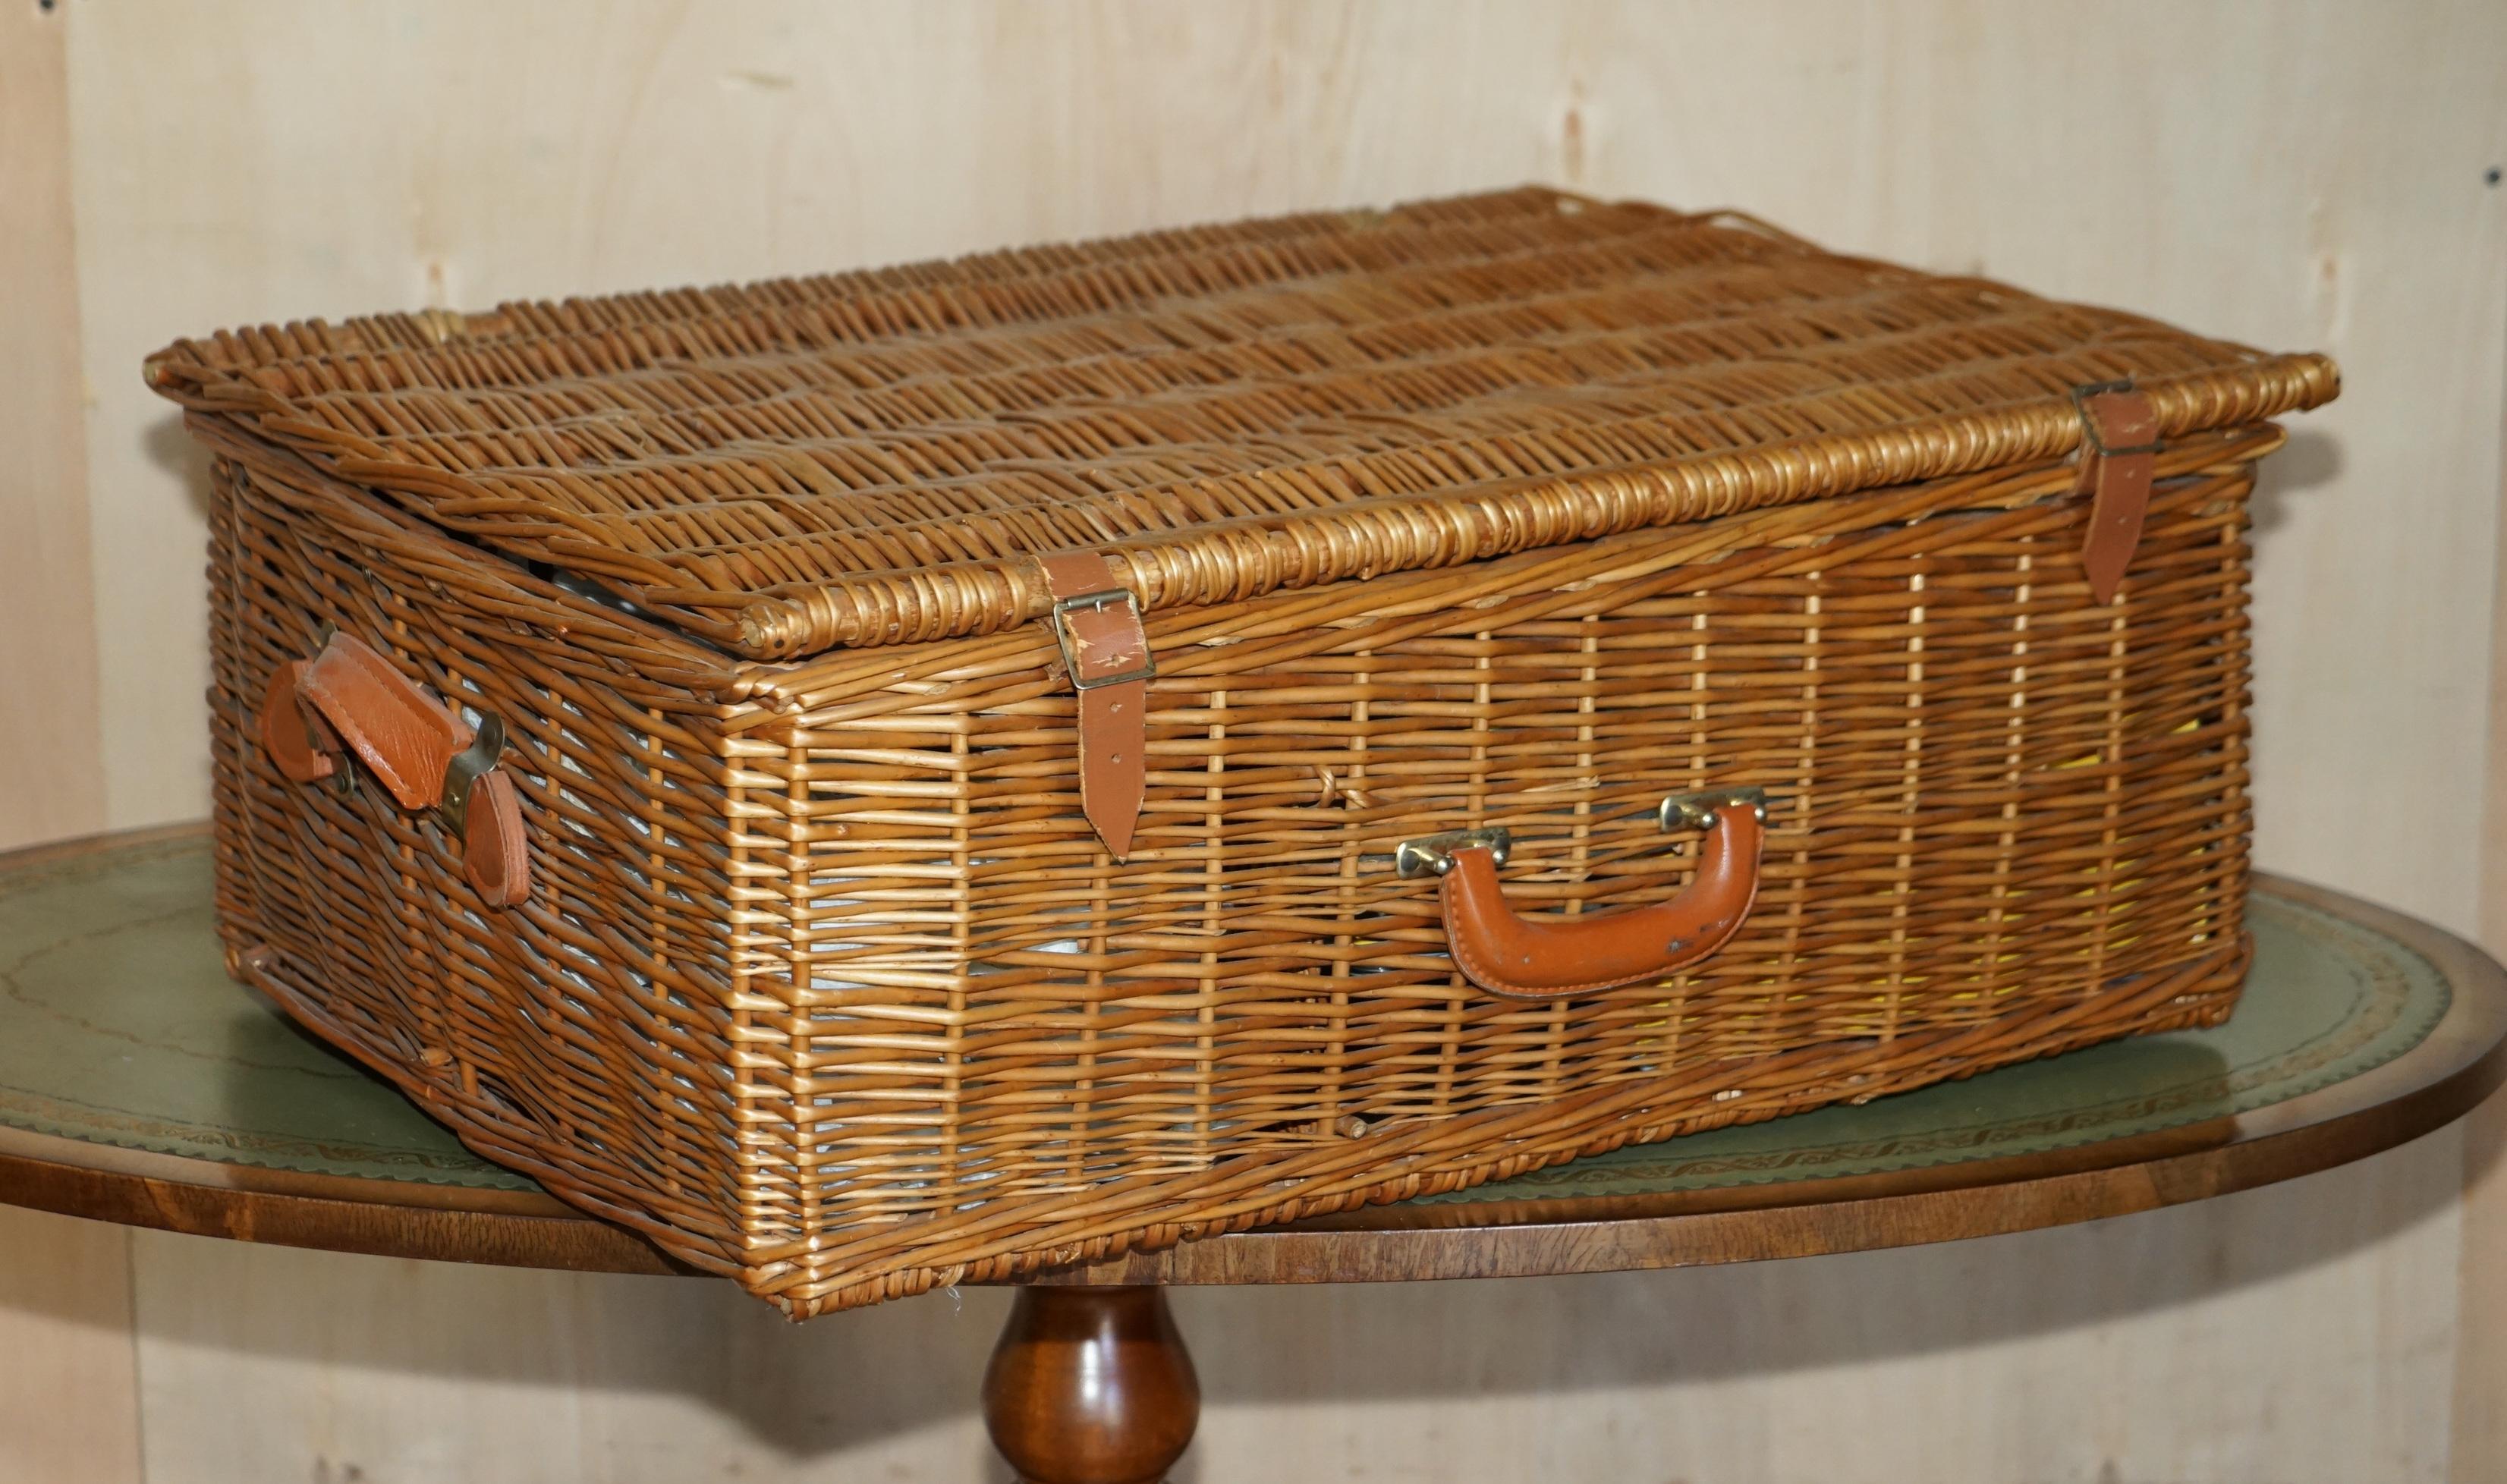 We are delighted to offer for sale this stunning Vintage large Fortnum & Mason six person wicket picnic hamper RRP £2550

A very well made and decorative hamper set by the market leaders, Fortnum & Mason, this is an unused vintage suite, the